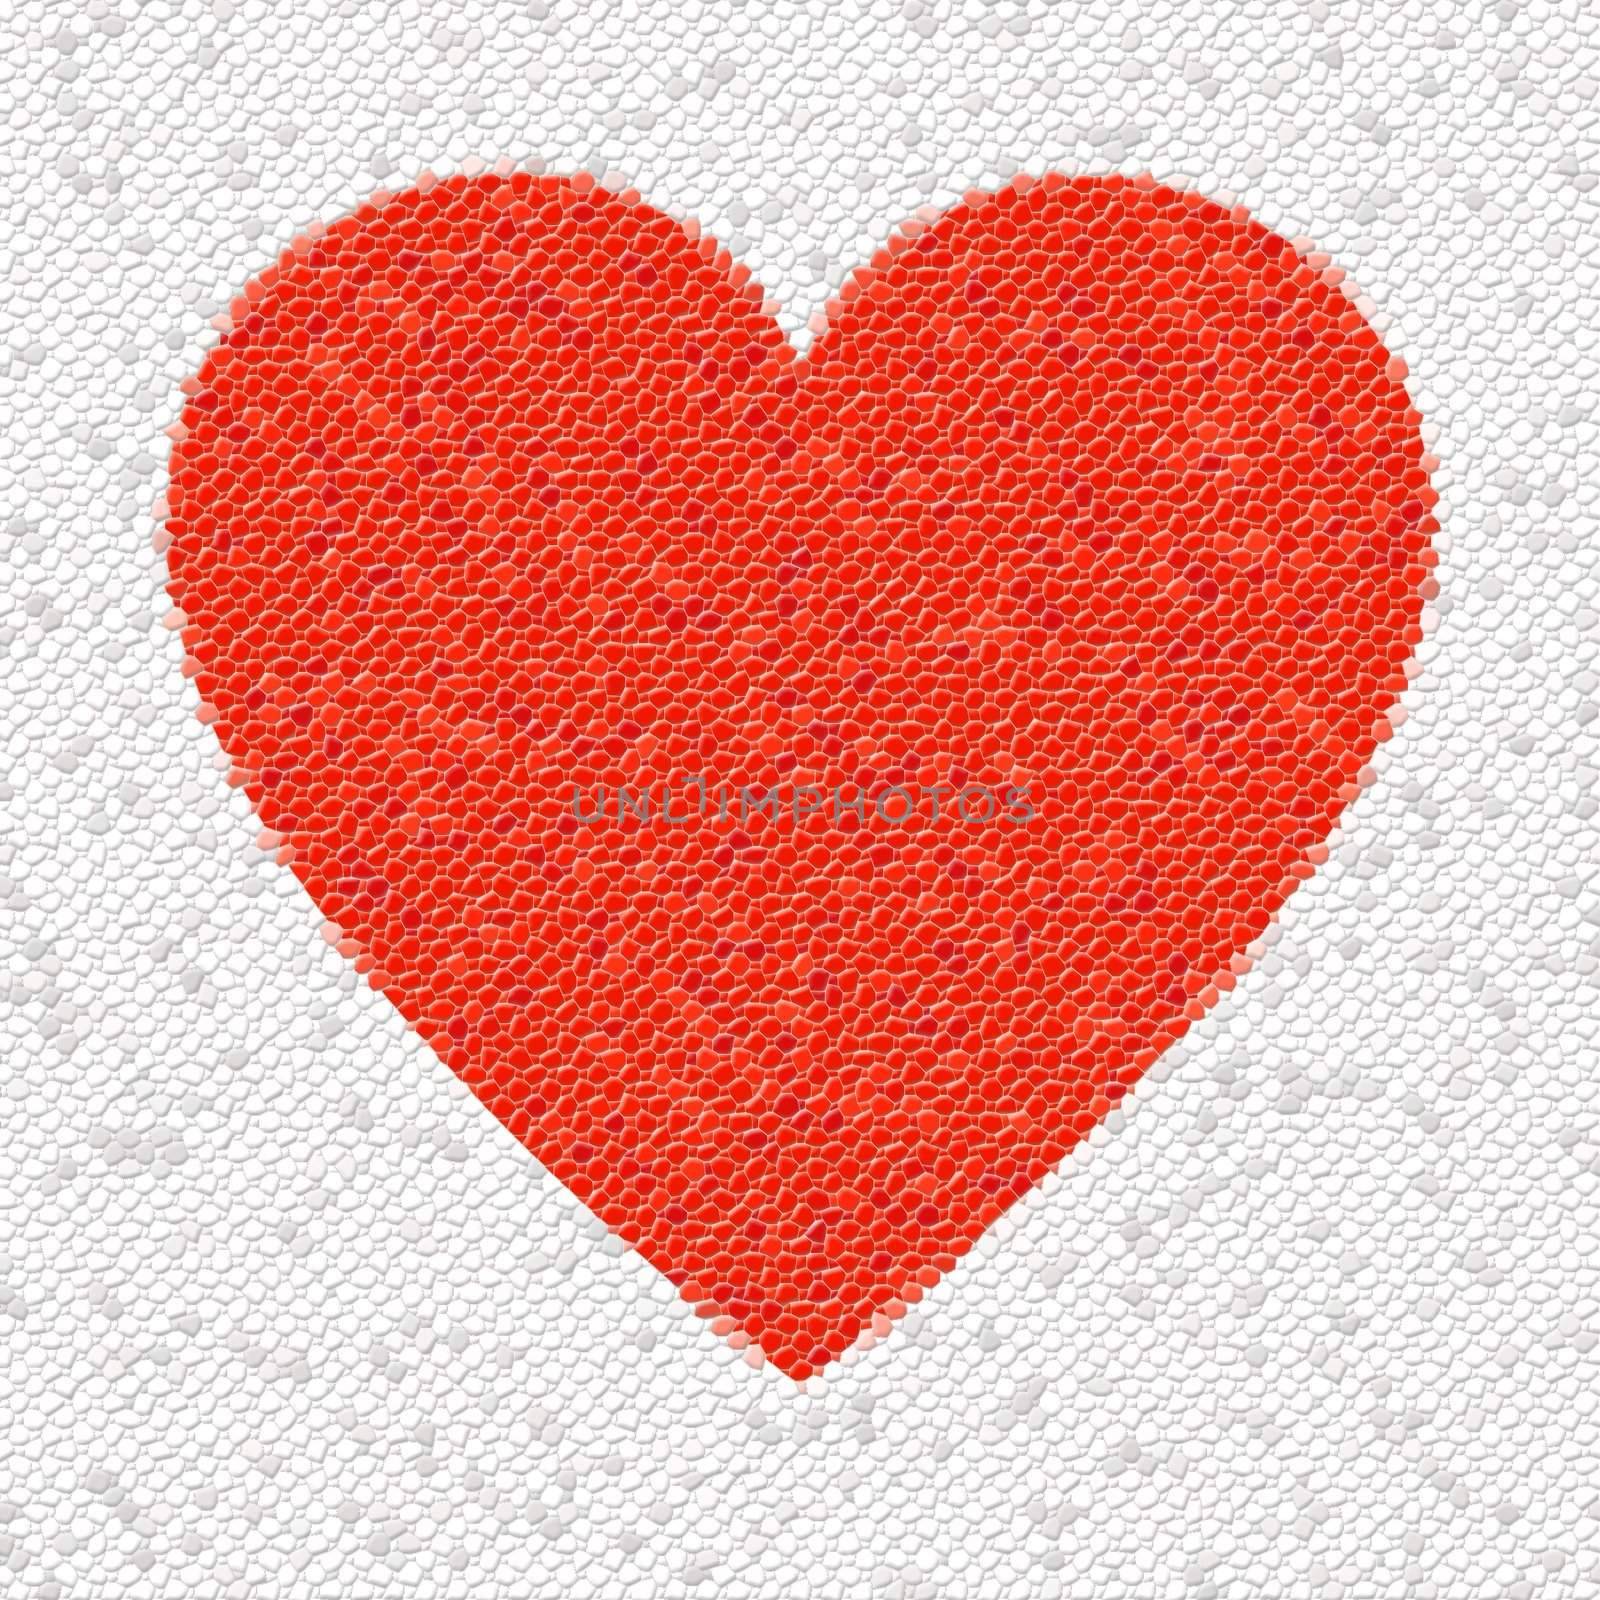 Red heart mosaic made from little tiles.